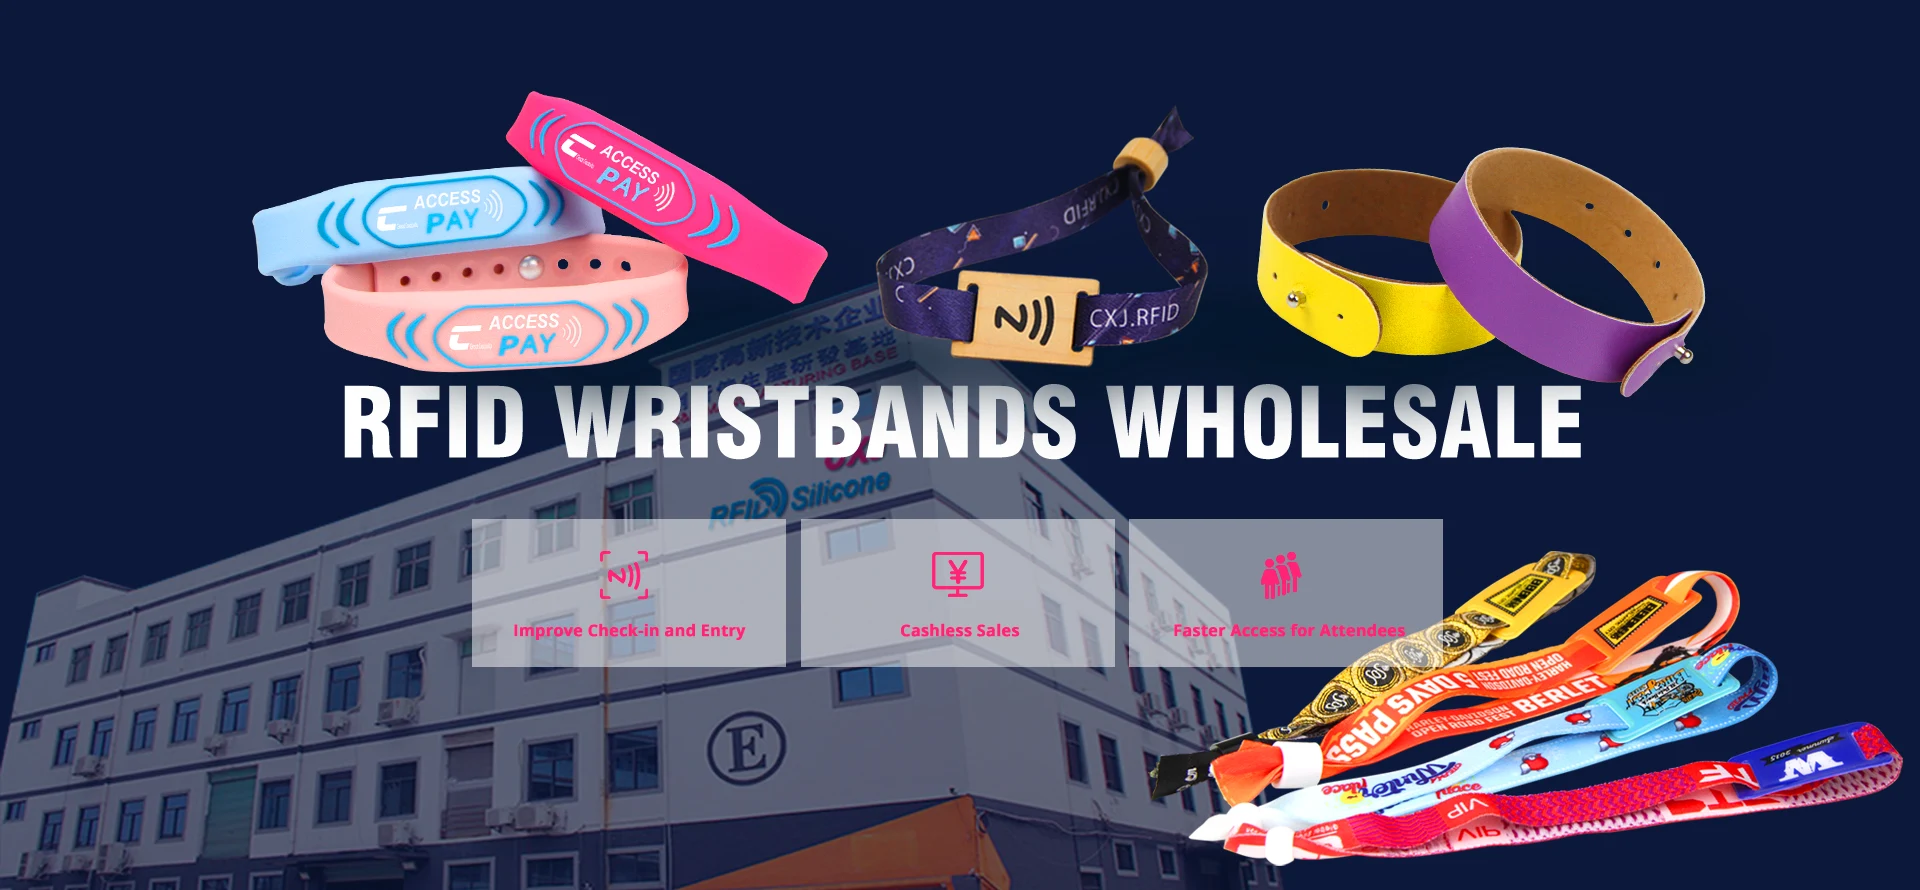 Wholesale RFID Wristband for Events